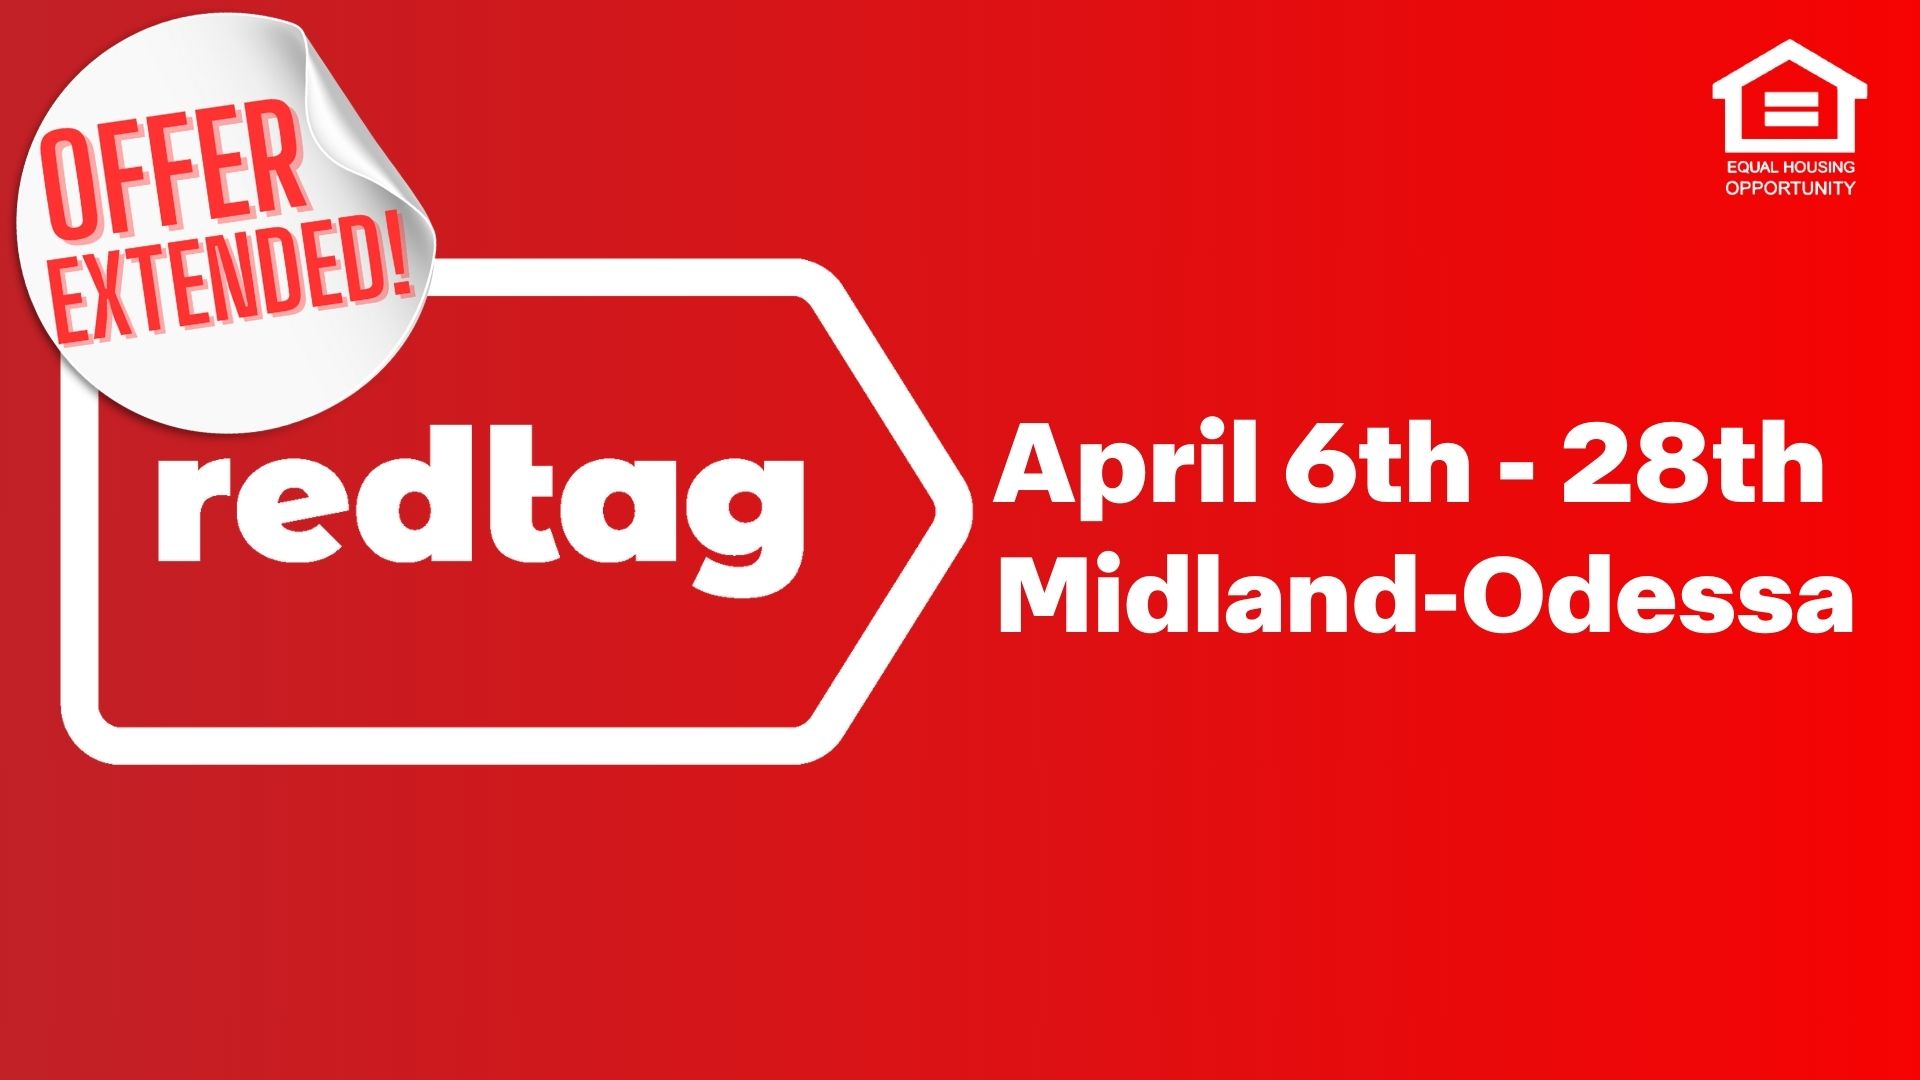 Red Background with white lettering saying "Offer Extended Red tag April 6th - 28th Midland - Odessa"